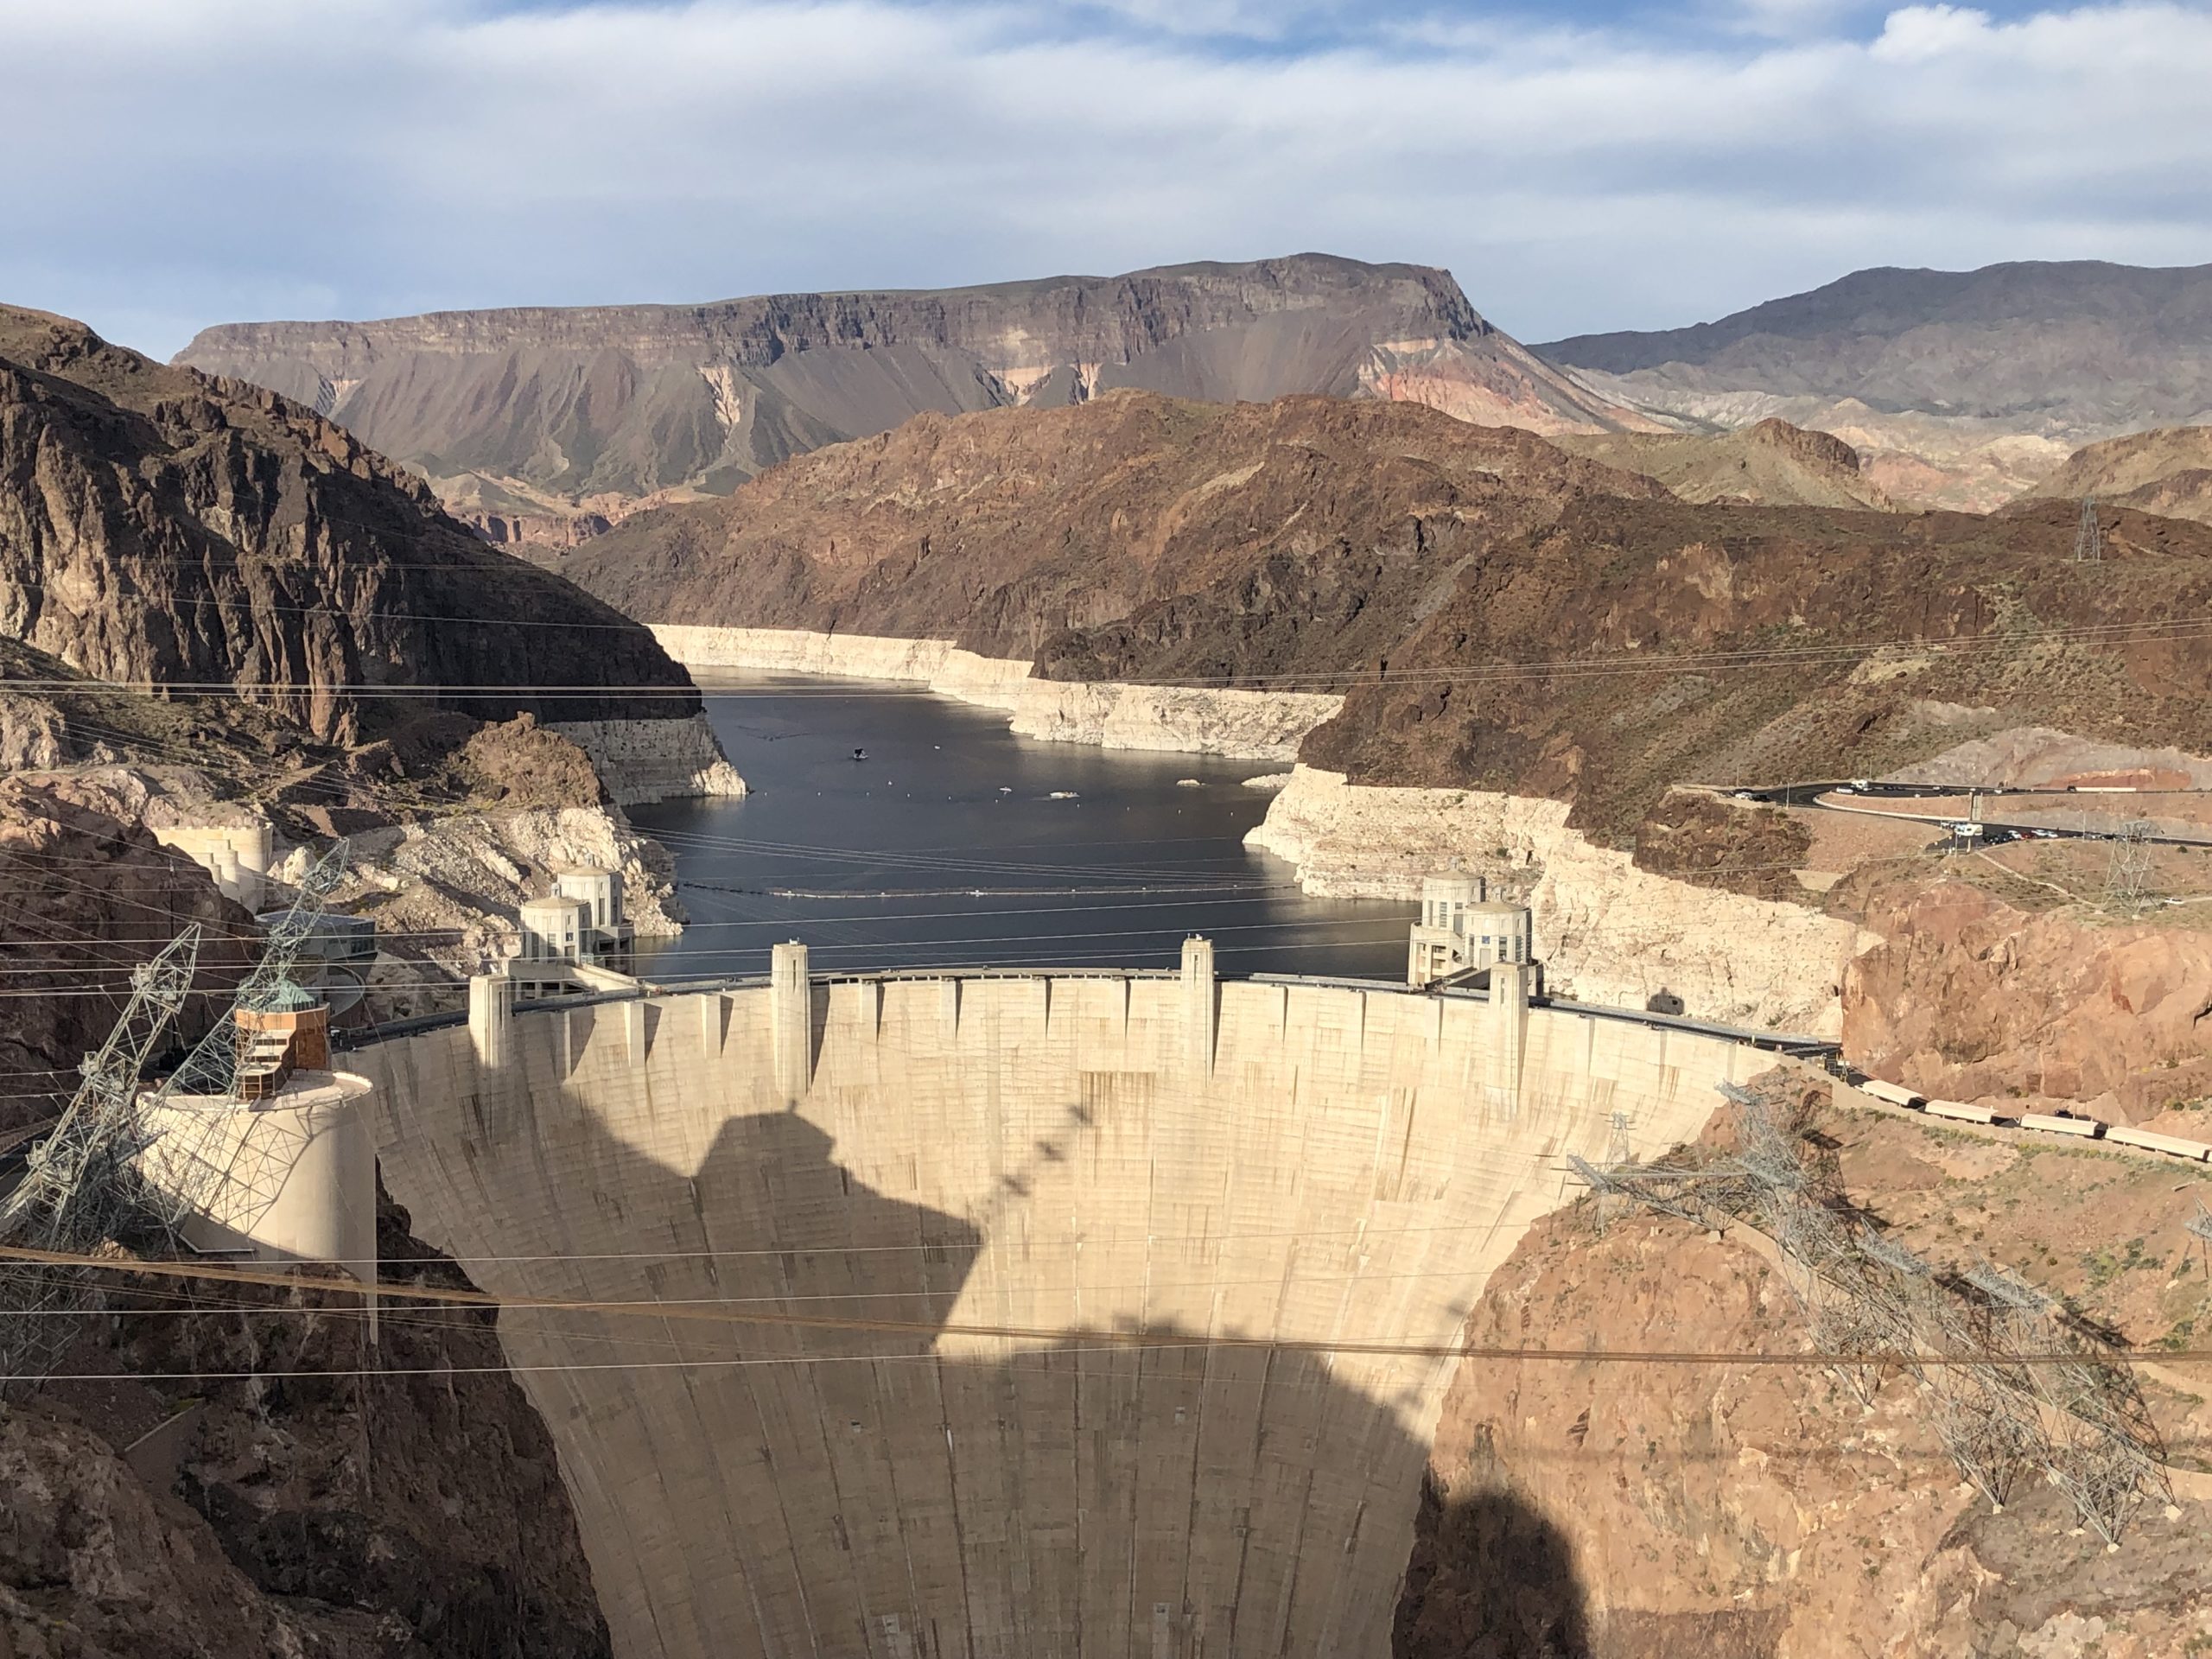 Hoover Dam and Lake Mead, near Las Vegas in April 2019. Lake Mead serves as a “bank account” for Arizona, California and Nevada to store Colorado River water. Lakes Mead and Powell are the first and second largest reservoirs in the U.S. respectively. They are managed by the U.S. Bureau of Reclamation. Photo credit: Denver Water.